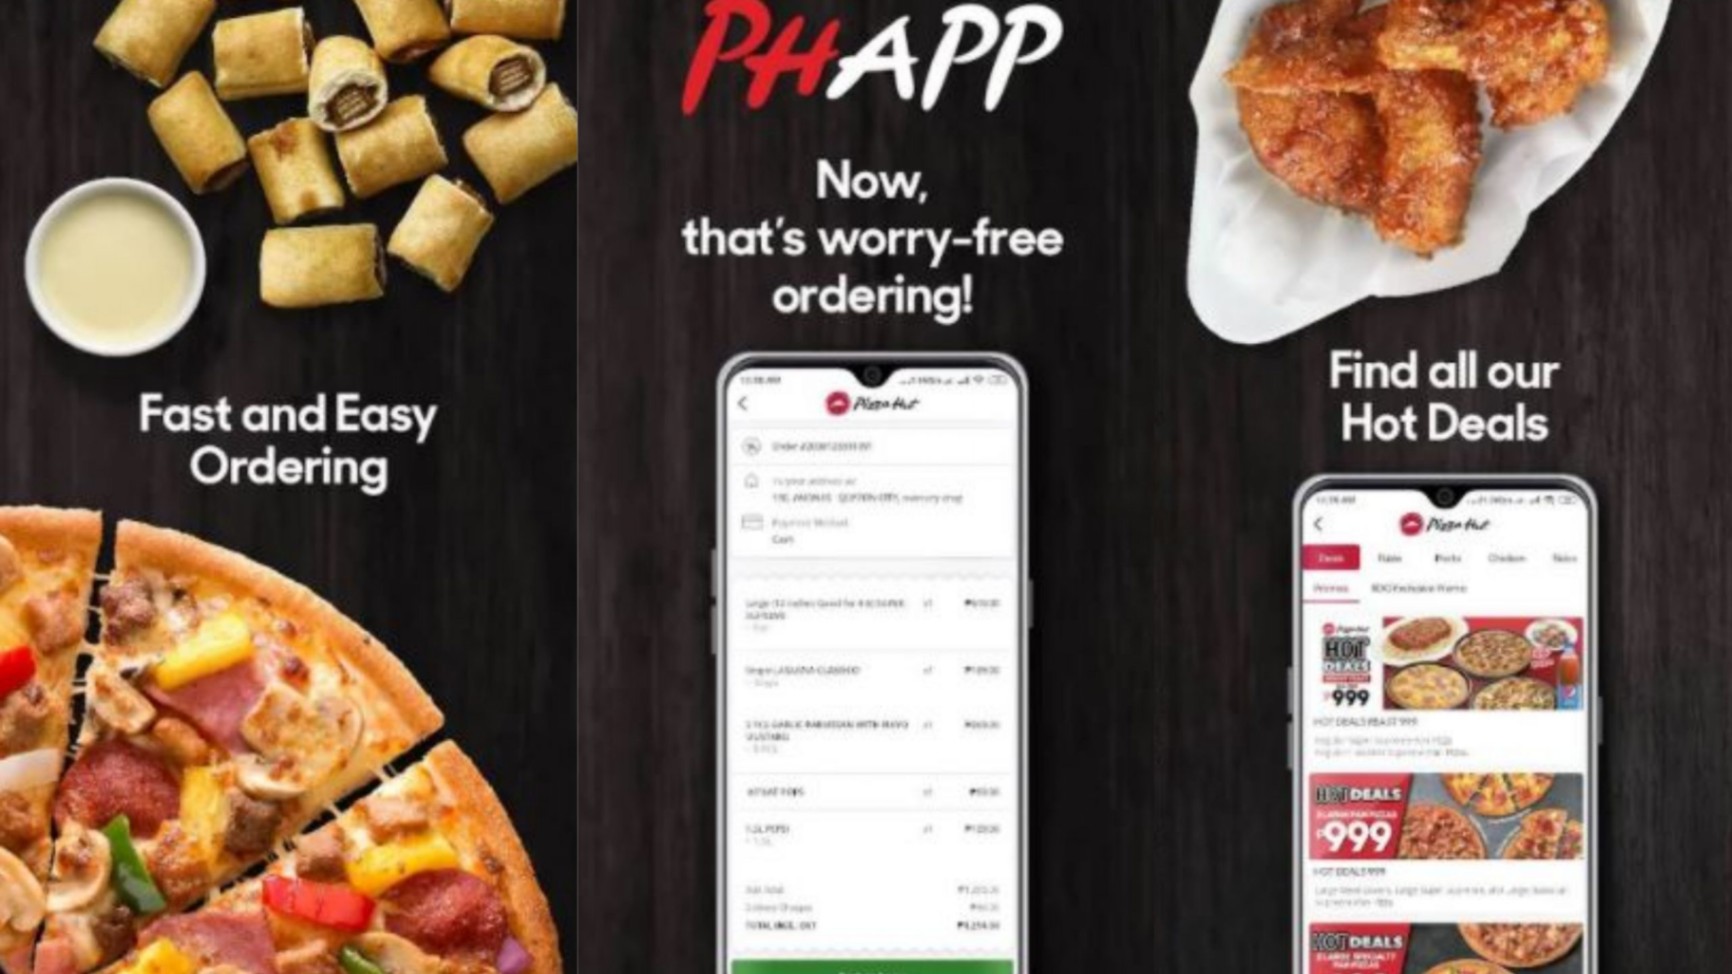 Order Pizzas from Anywhere with the Pizza Hut App